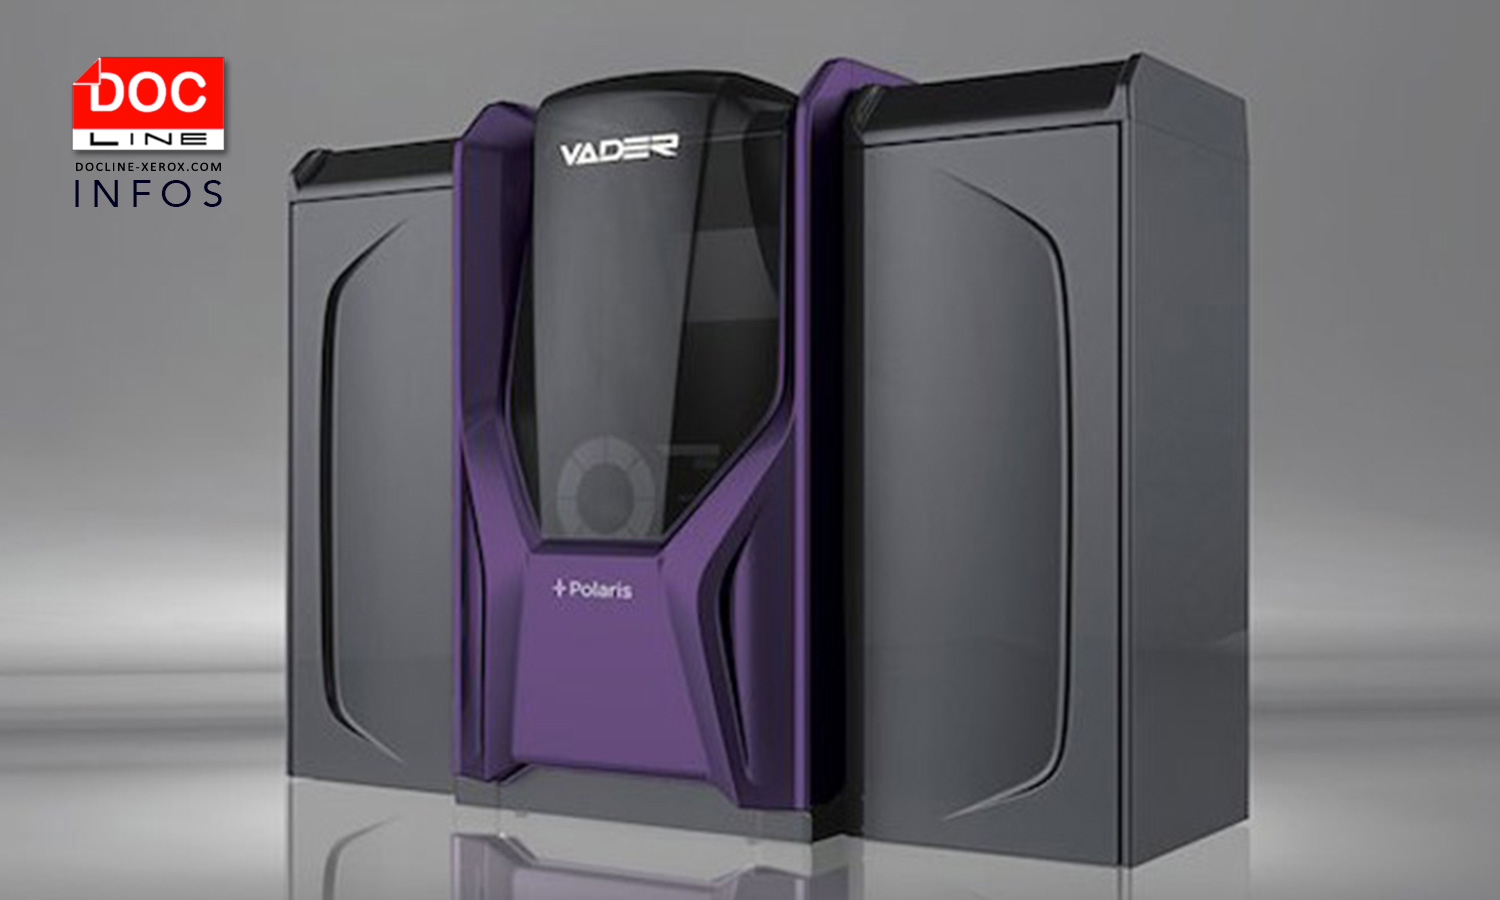 xerox-vader systems-3d-docline